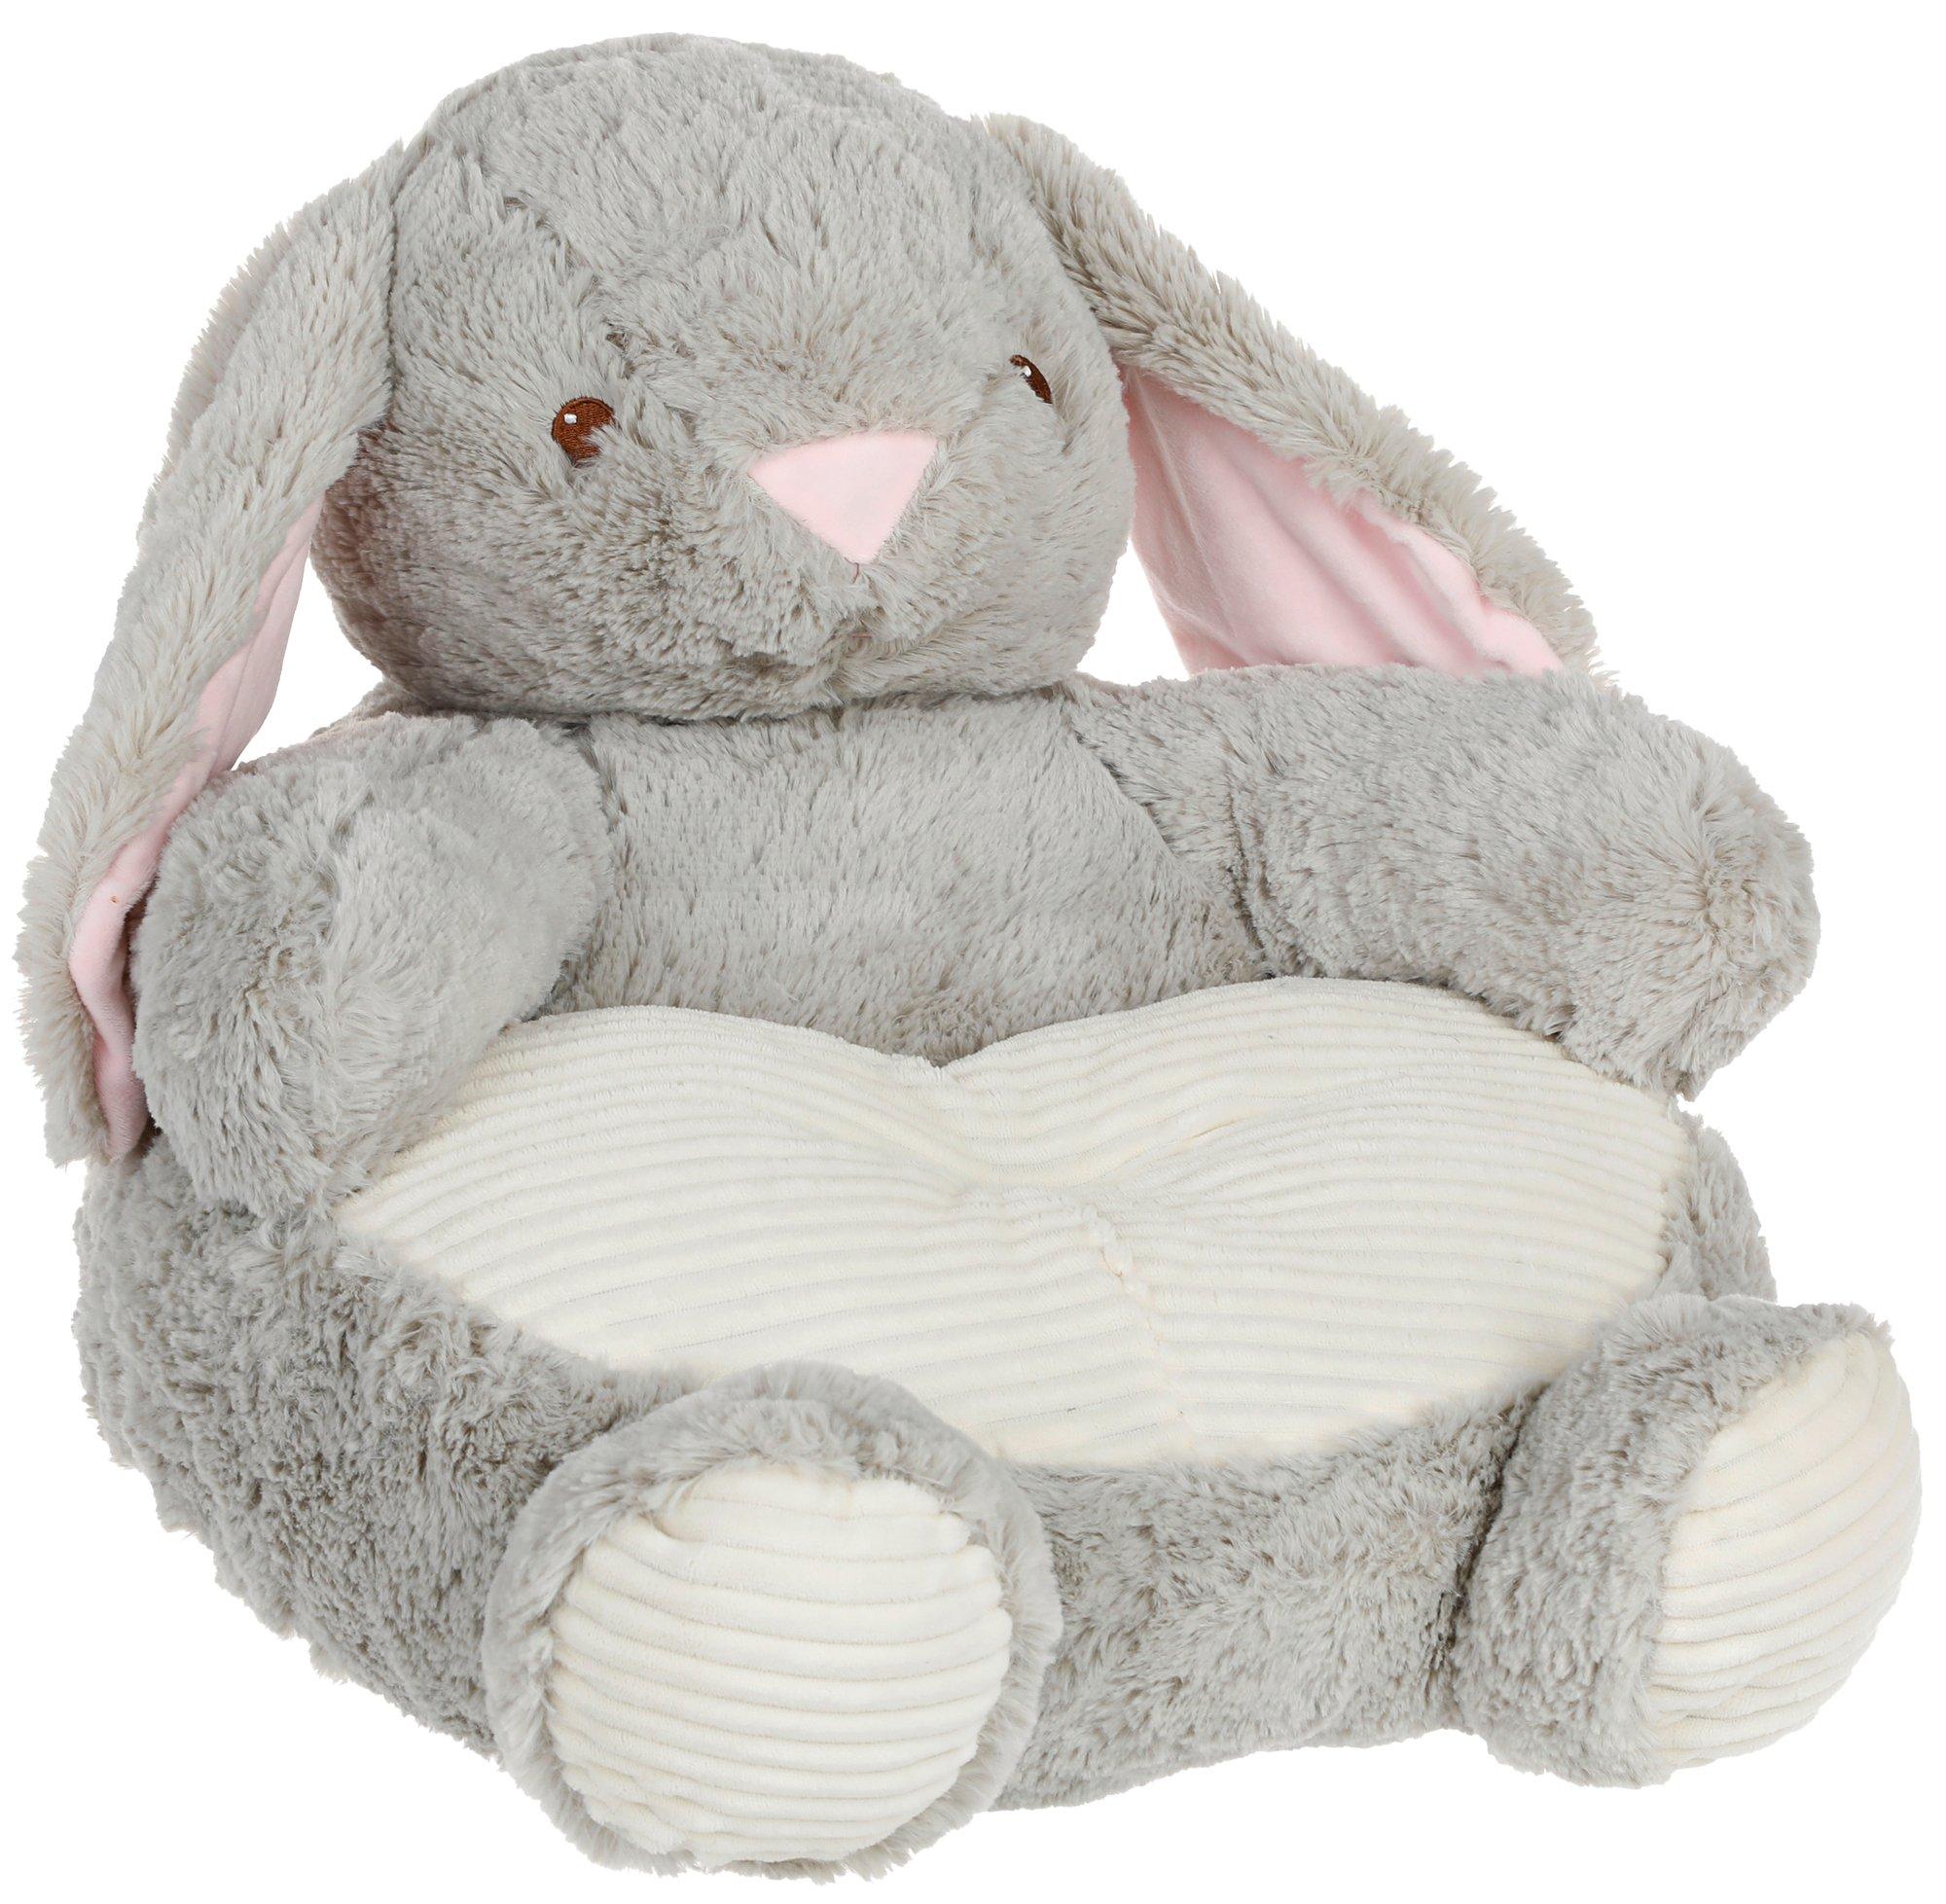 Bunny Plush Chair - Grey | Burkes Outlet